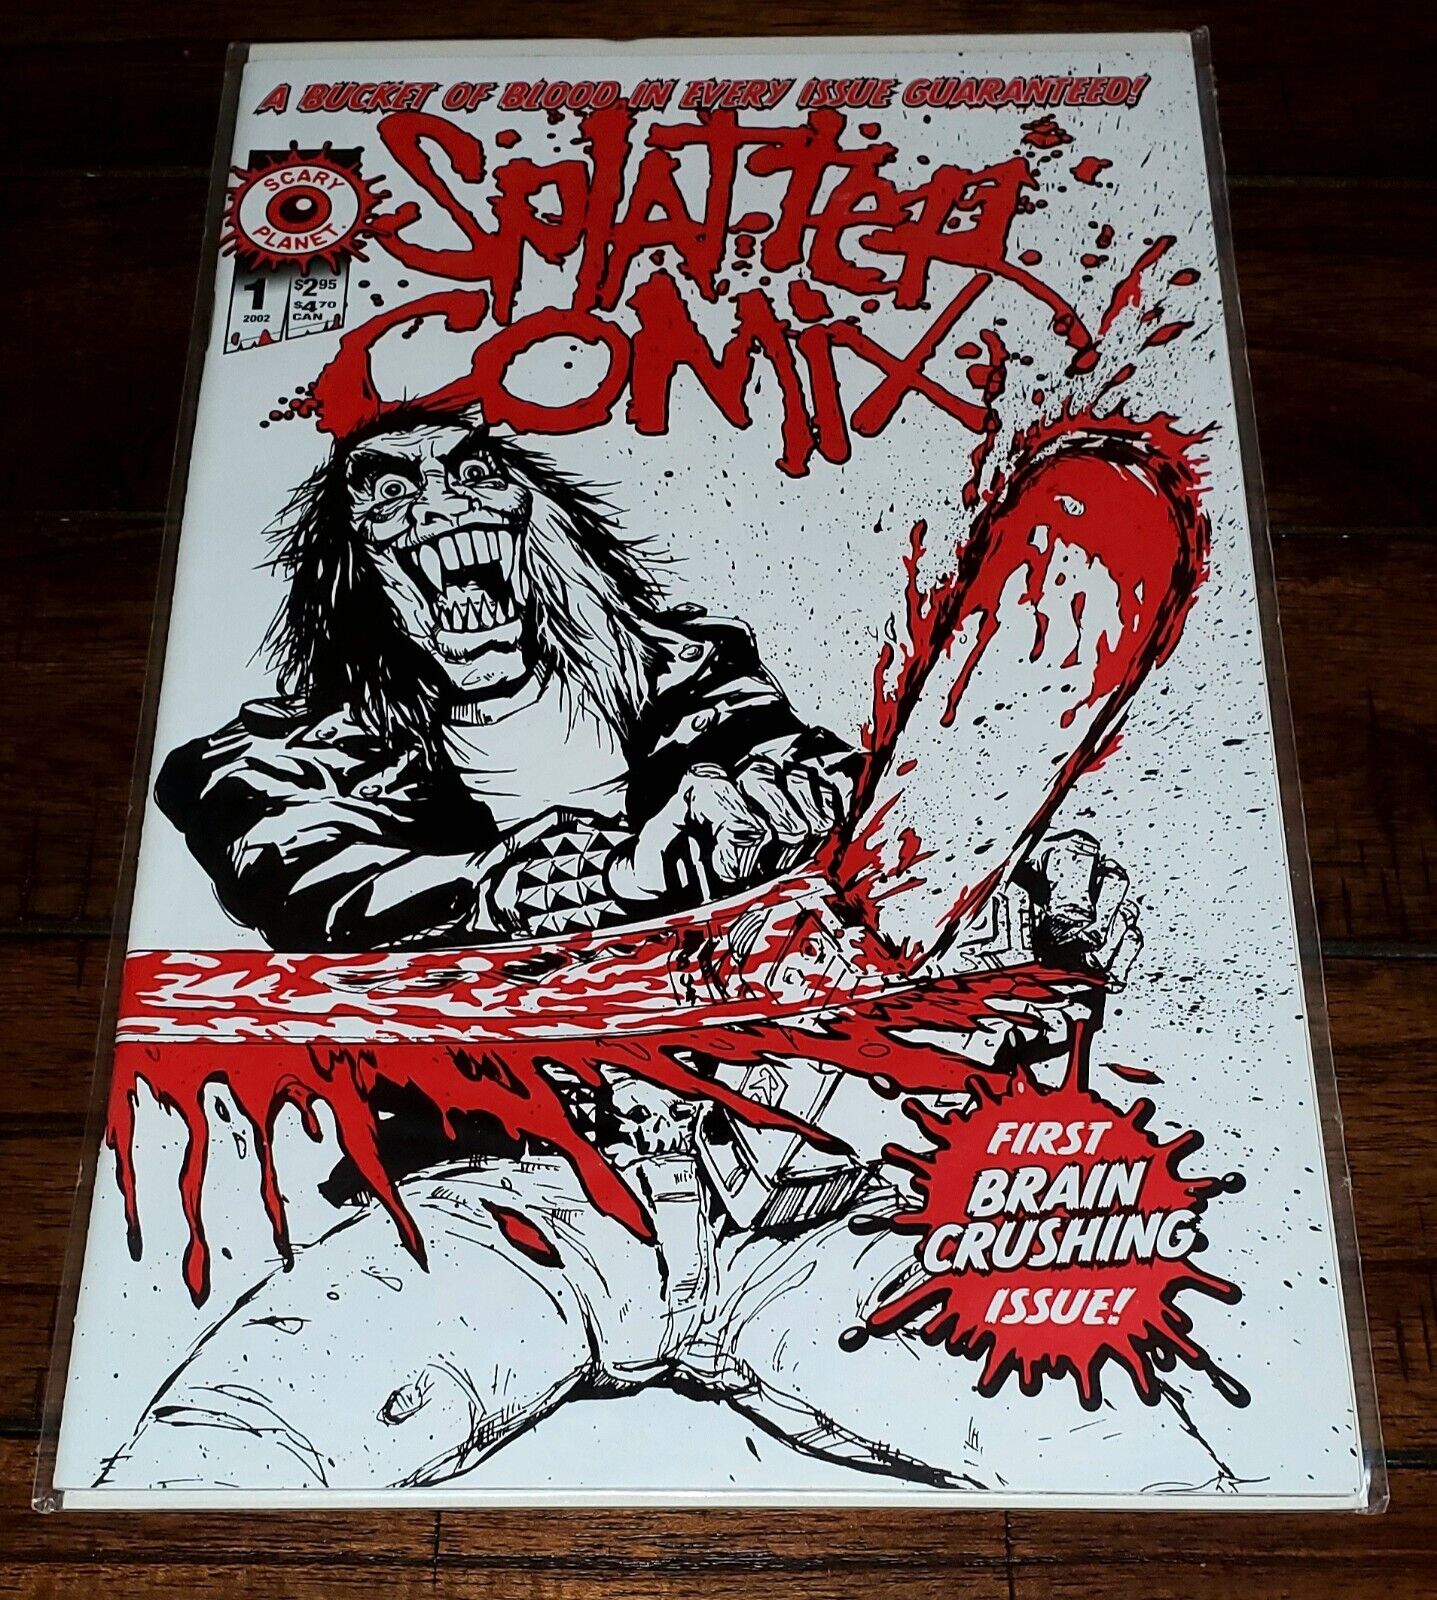 SCARY PLANET SPLATTER COMIX #1 1ST BRAIN CRUSHING ISSUE HORROR COMIC BOOK NM